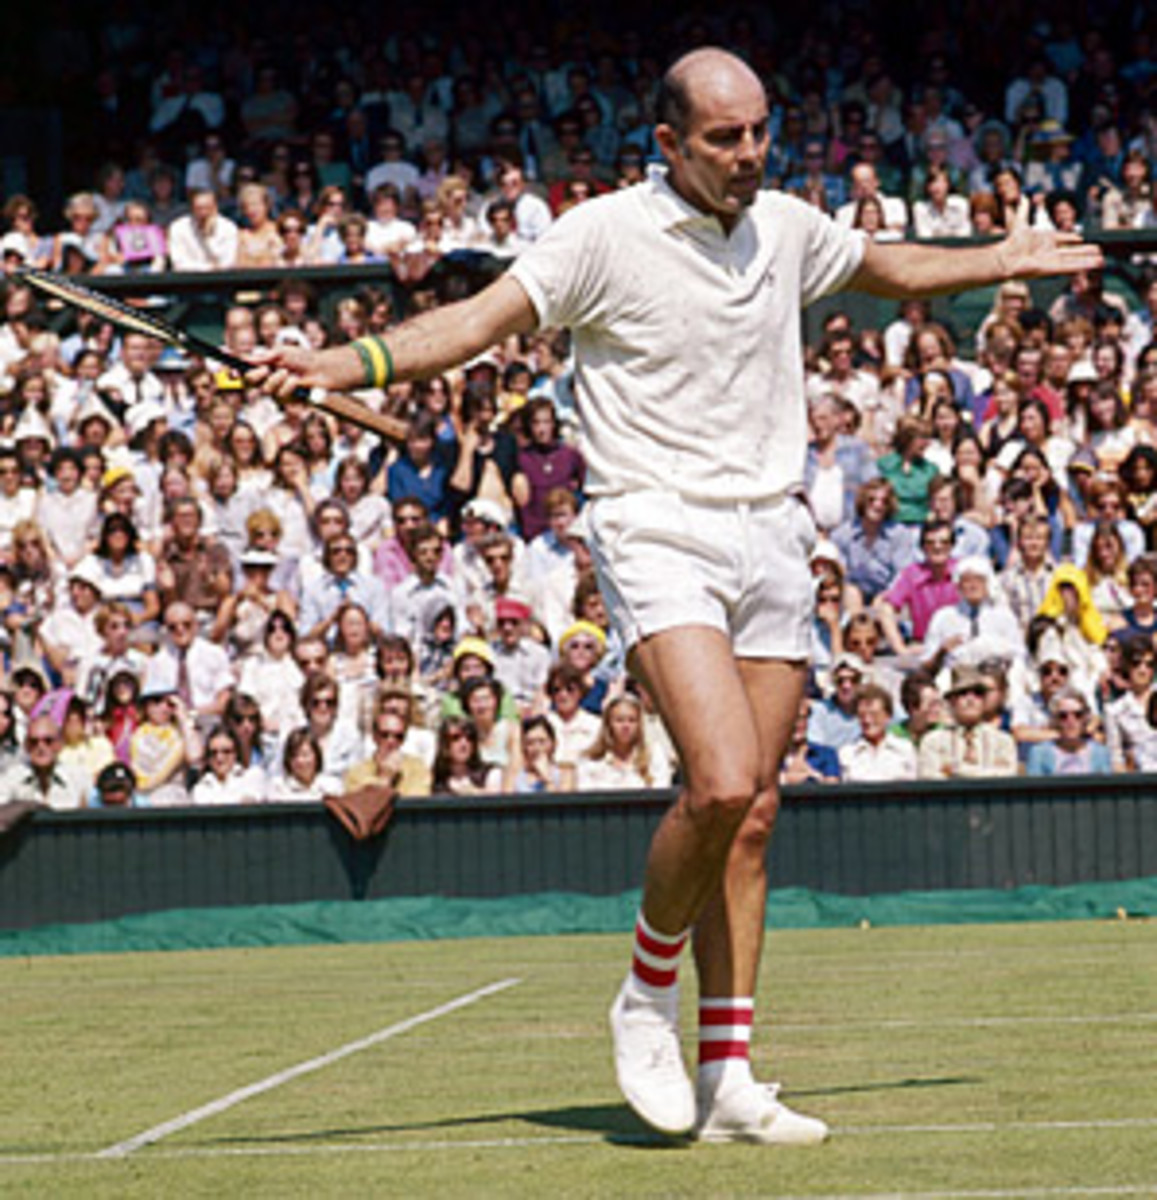 Bob Hewitt, shown here at Wimbledon in 1975, was suspended from the Tennis Hall of Fame.